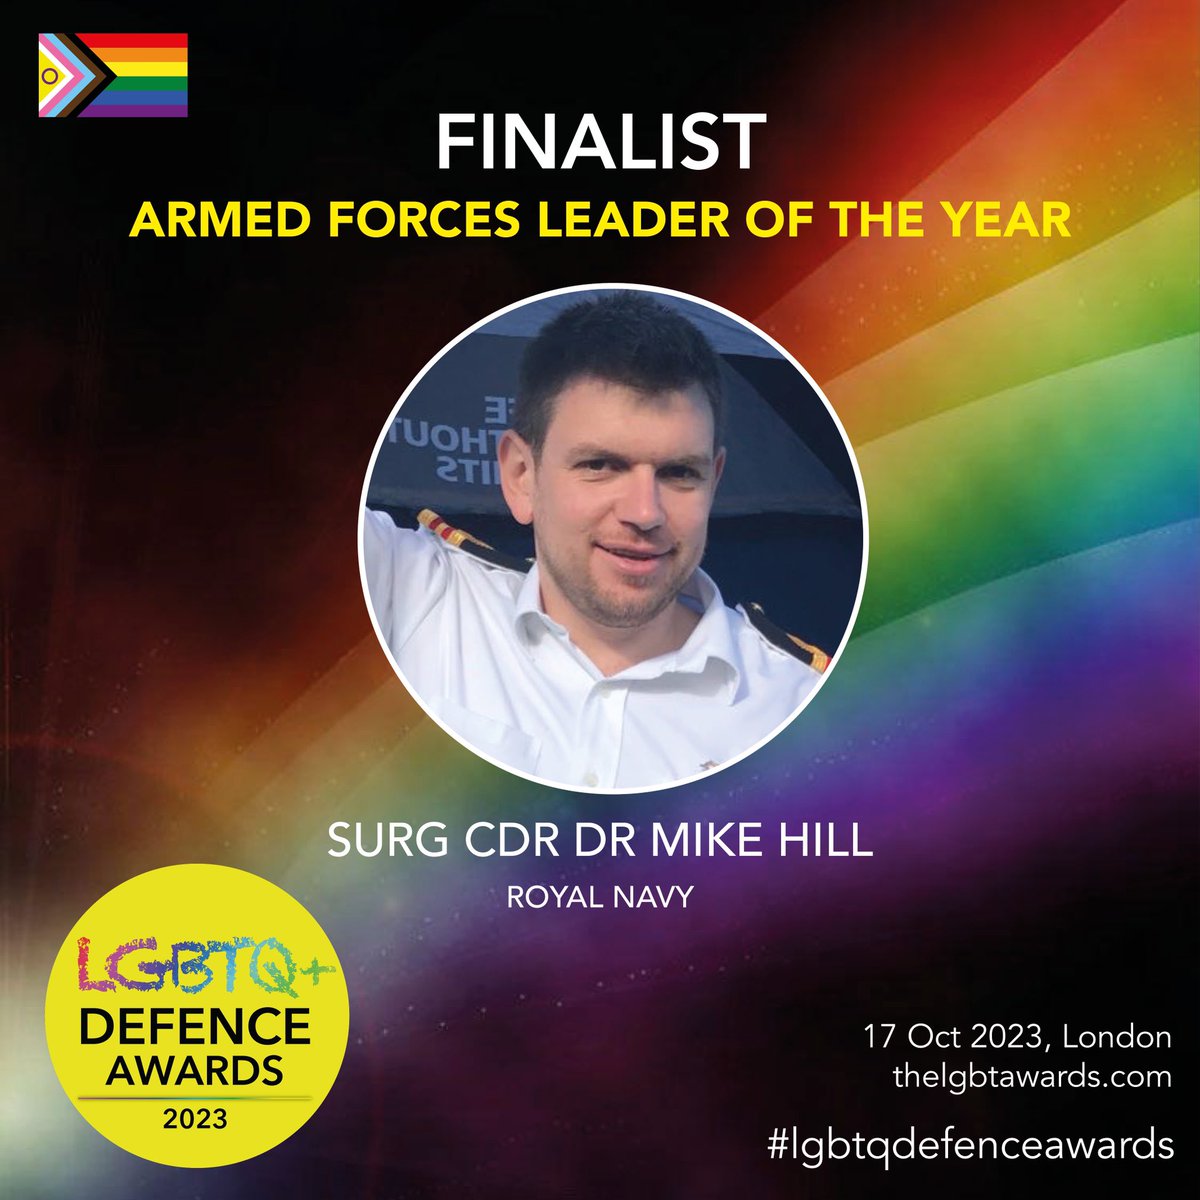 So this thing happened, quite the surprise and no idea who nominated me, and wow so amazing other people nominated too!

@defencelgbtq